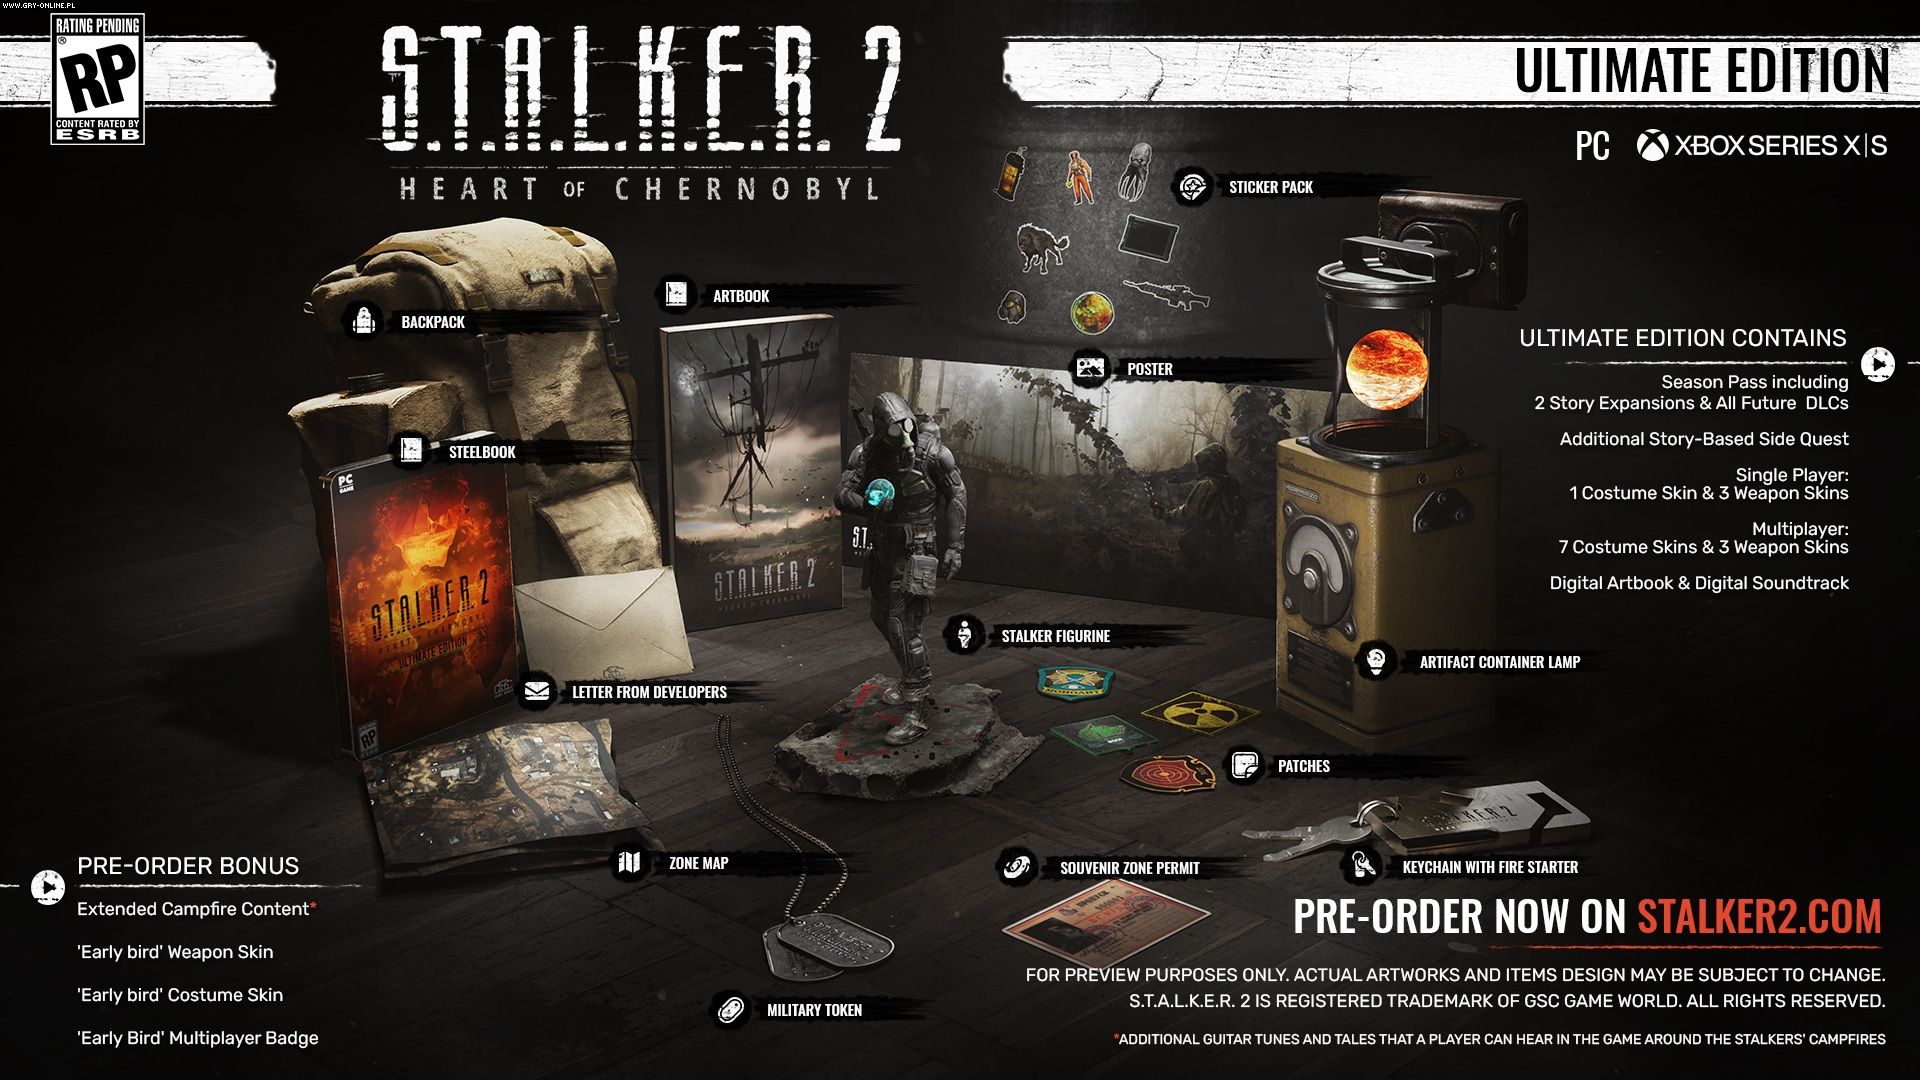 Stalker 2 reportedly delayed, Xbox refunding preorders